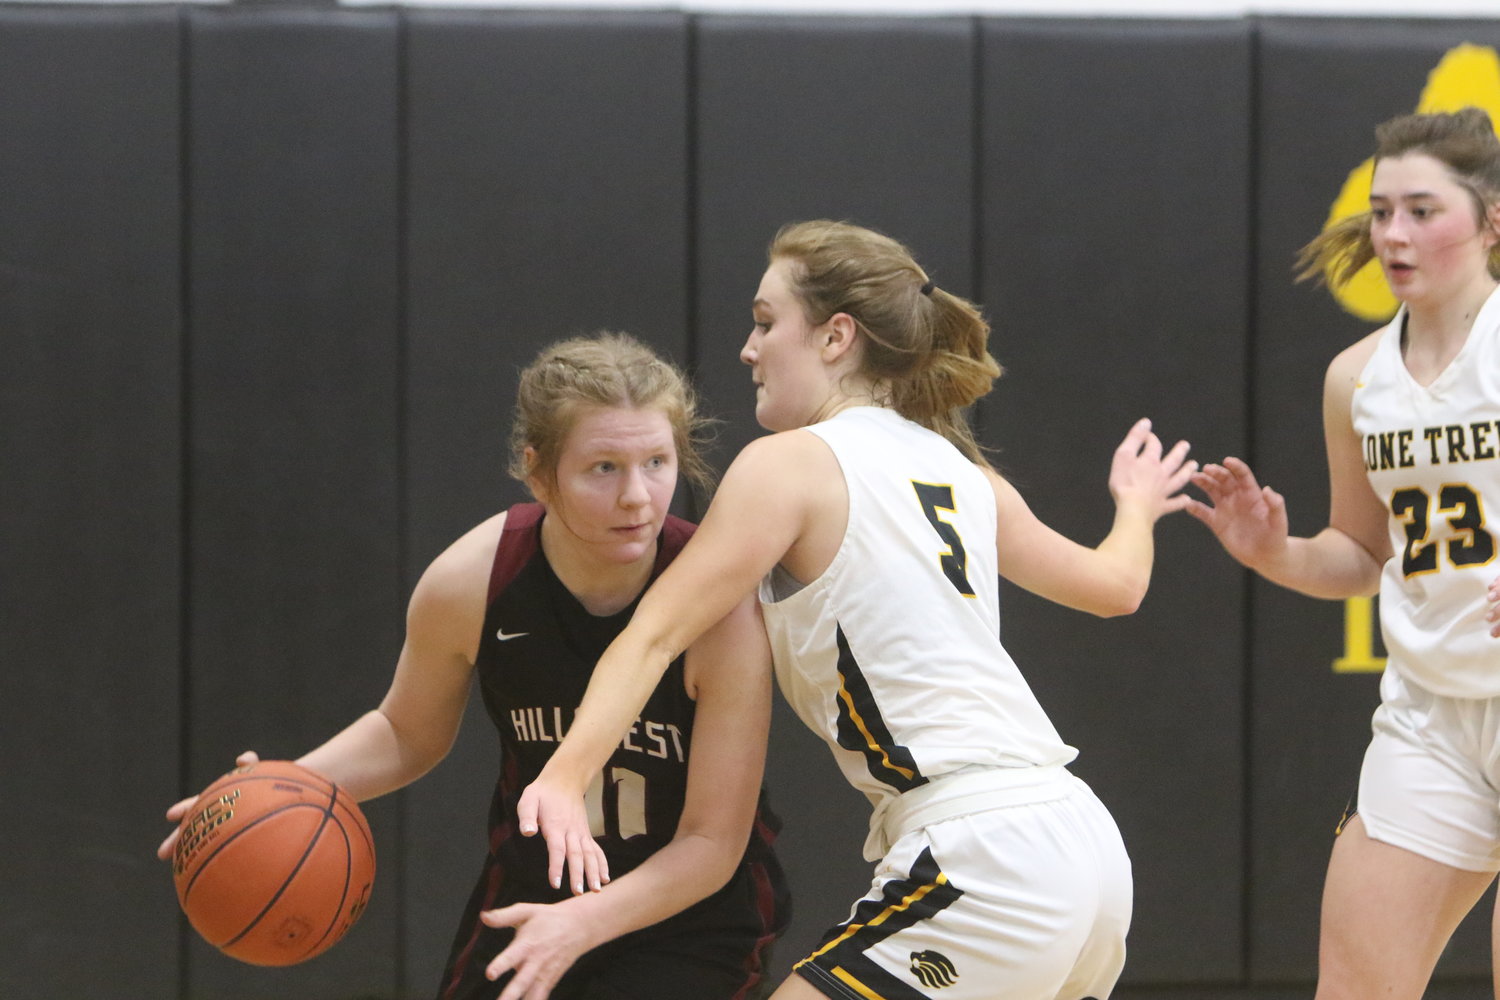 Hillcrest Academy senior Esther Hughes moves the ball against Lone Tree's Rylee Shield. Hughes had 17 points and a game-high 12 rebounds for a double-double.